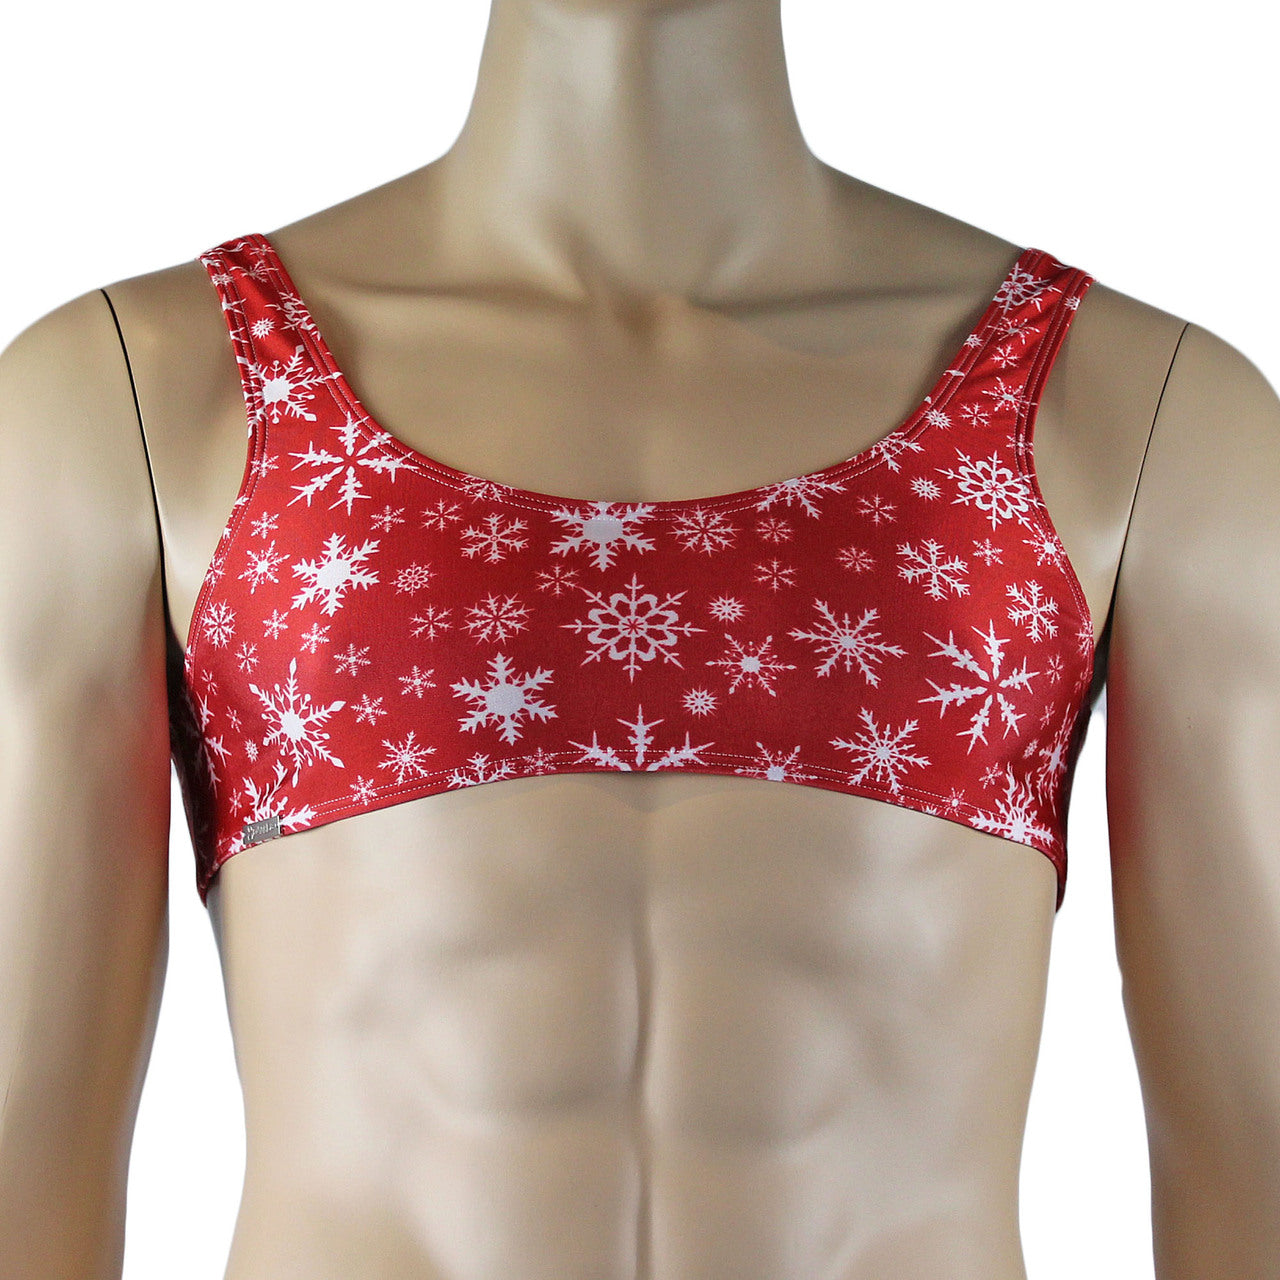 Mens Lingerie Snowflake Print Spandex Bra Top Red and White